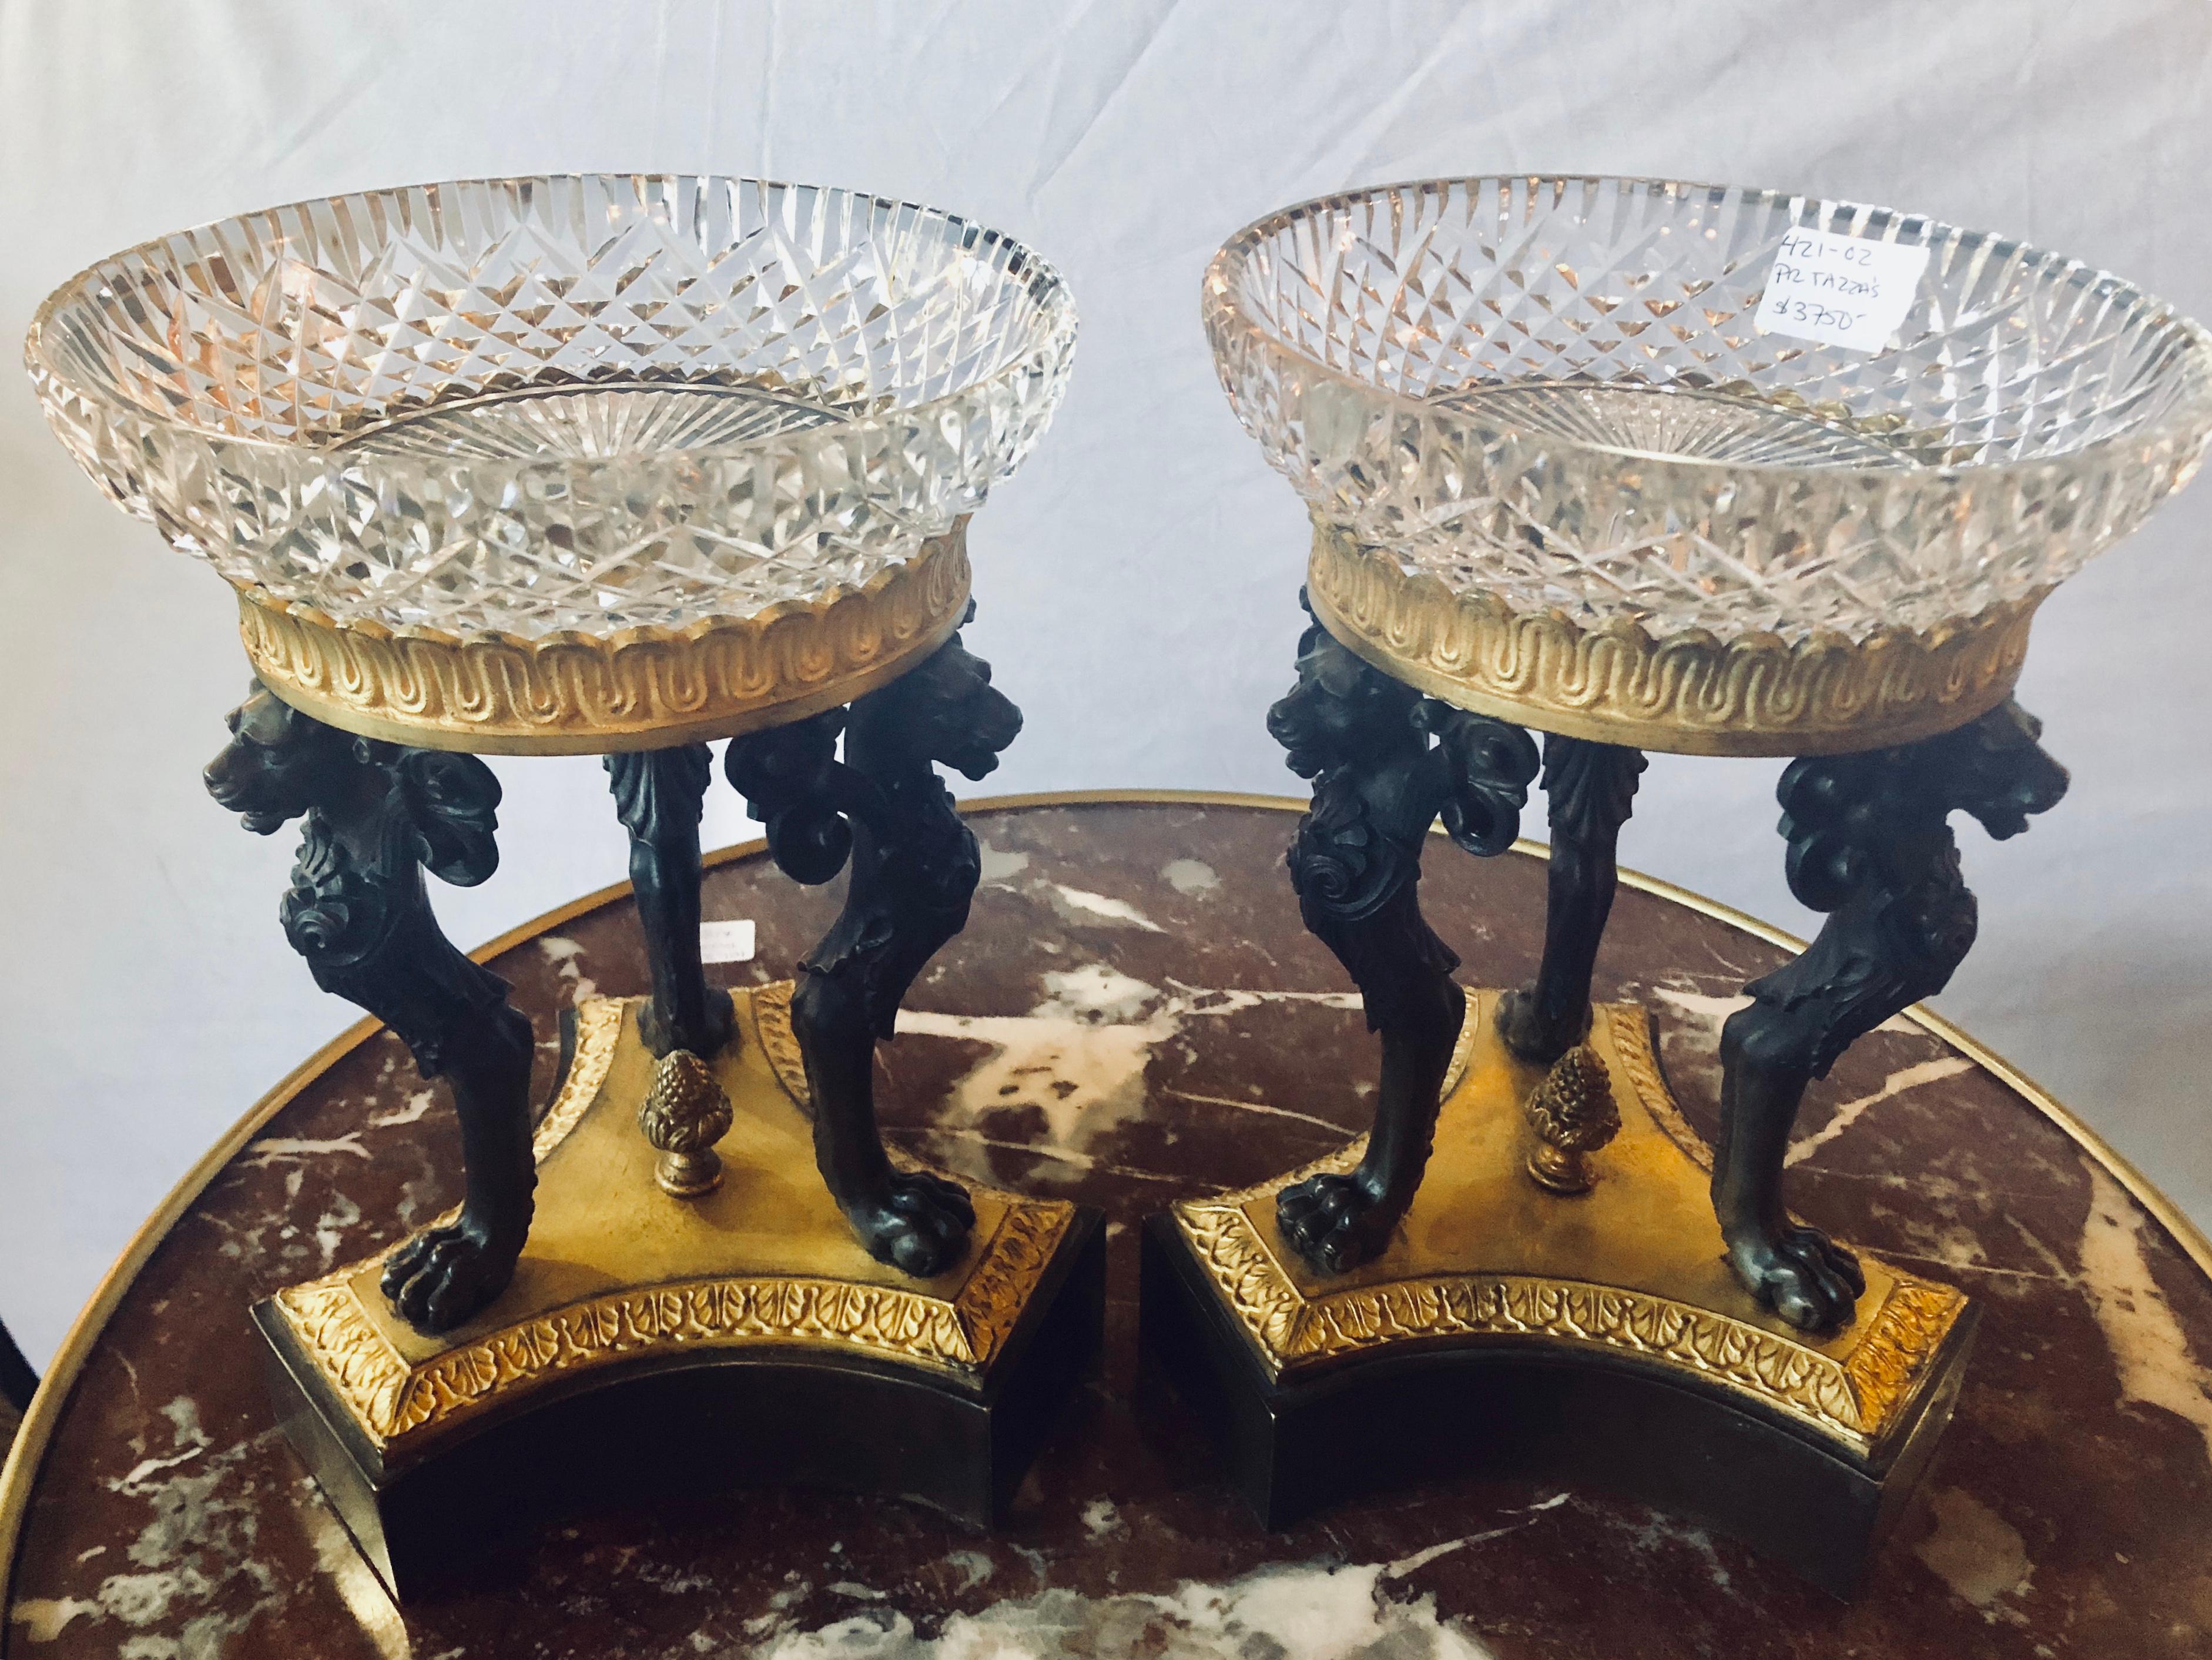 Pair 19th century Empire Figural Tazzas / Compotes doré and patinated with Cavan signed crystal bowls. This simply stunning pair of Tazzas have crystal compotes signed Cavan supported by a doré bronze apron having three full bodied winged lions on a